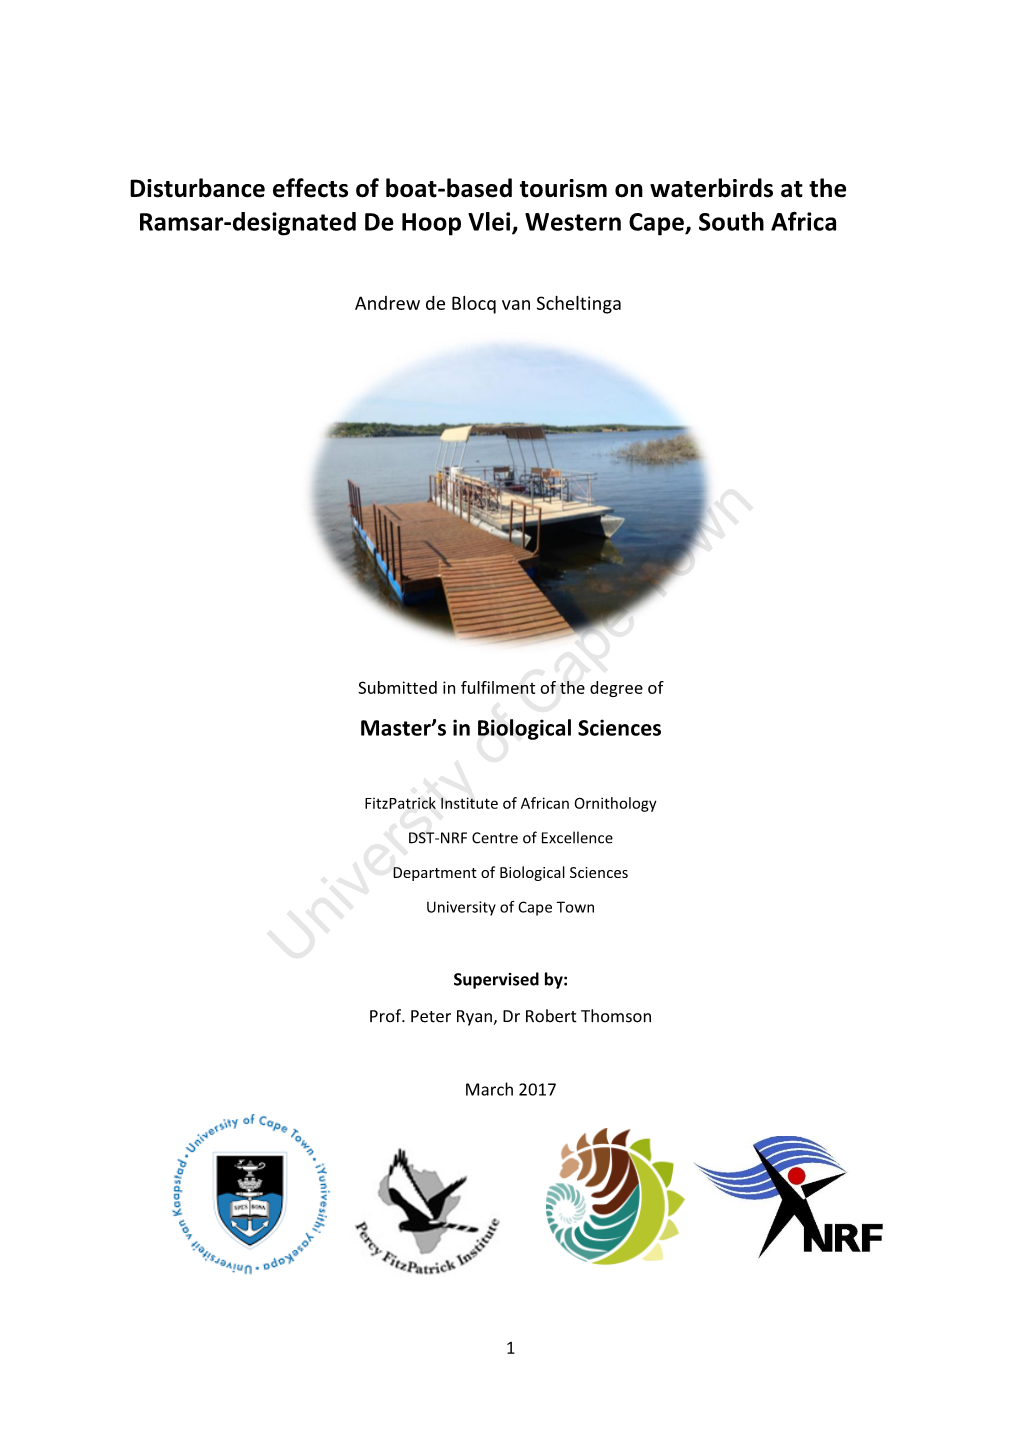 Disturbance Effects of Boat-Based Tourism on Waterbirds at the Ramsar-Designated De Hoop Vlei, Western Cape, South Africa